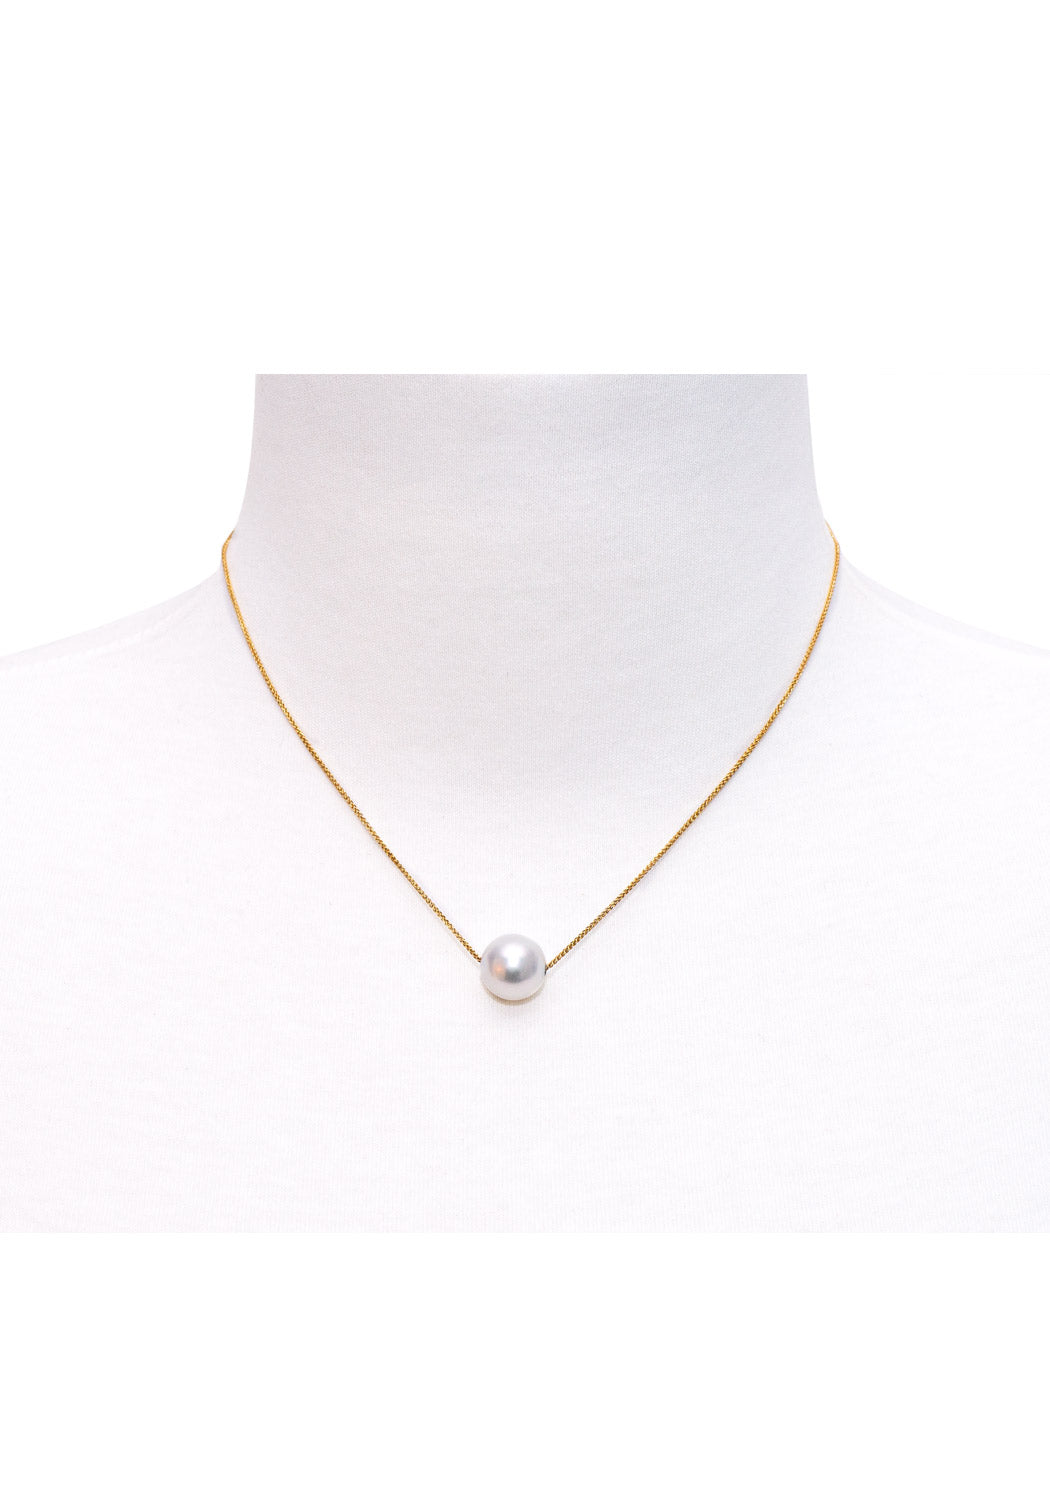 Solitaire 11-12 mm South Sea Pearl Pendant | OsterJewelers.com